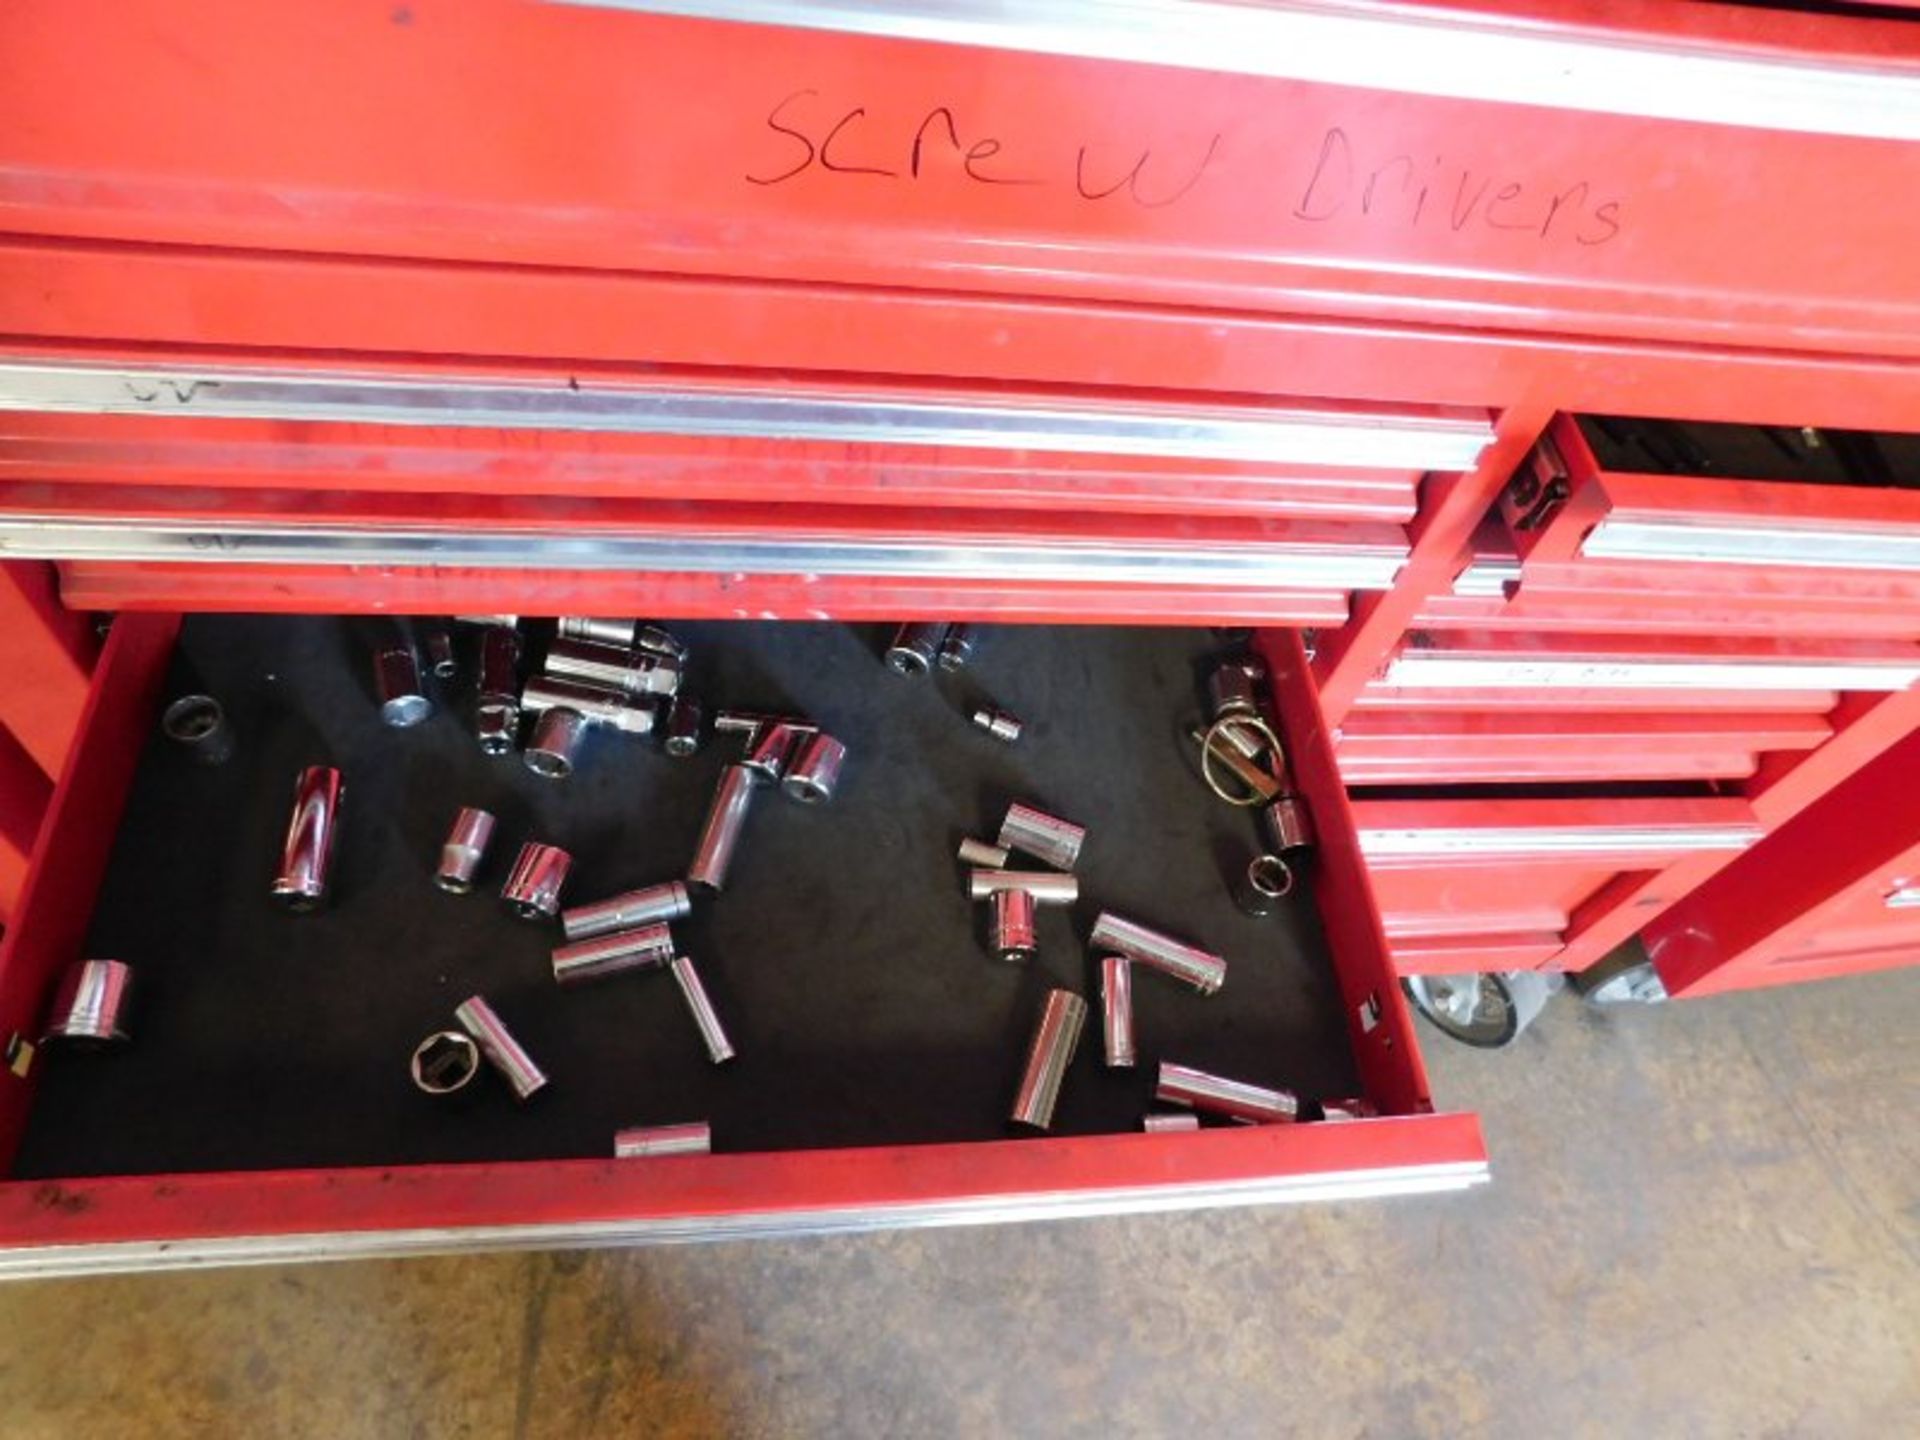 US General 13-Drawer Tool Box, w/Contents, Screwdrivers, Wrenches, Various hand tools - Image 3 of 3